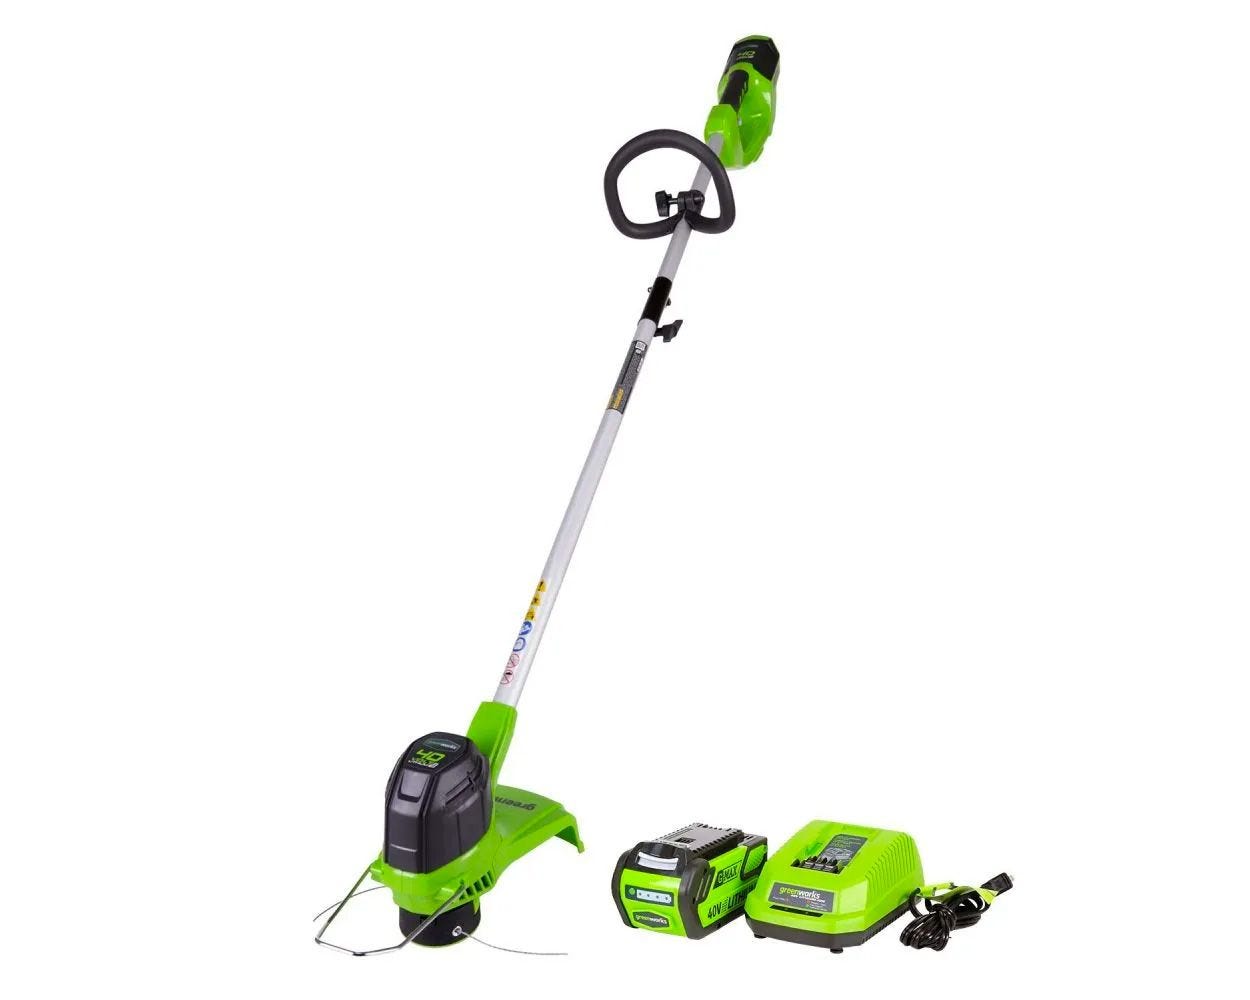 Greenworks 40V 15 Straight Shaft String Trimmer with 2.5 Ah Battery and Charger, 2111802